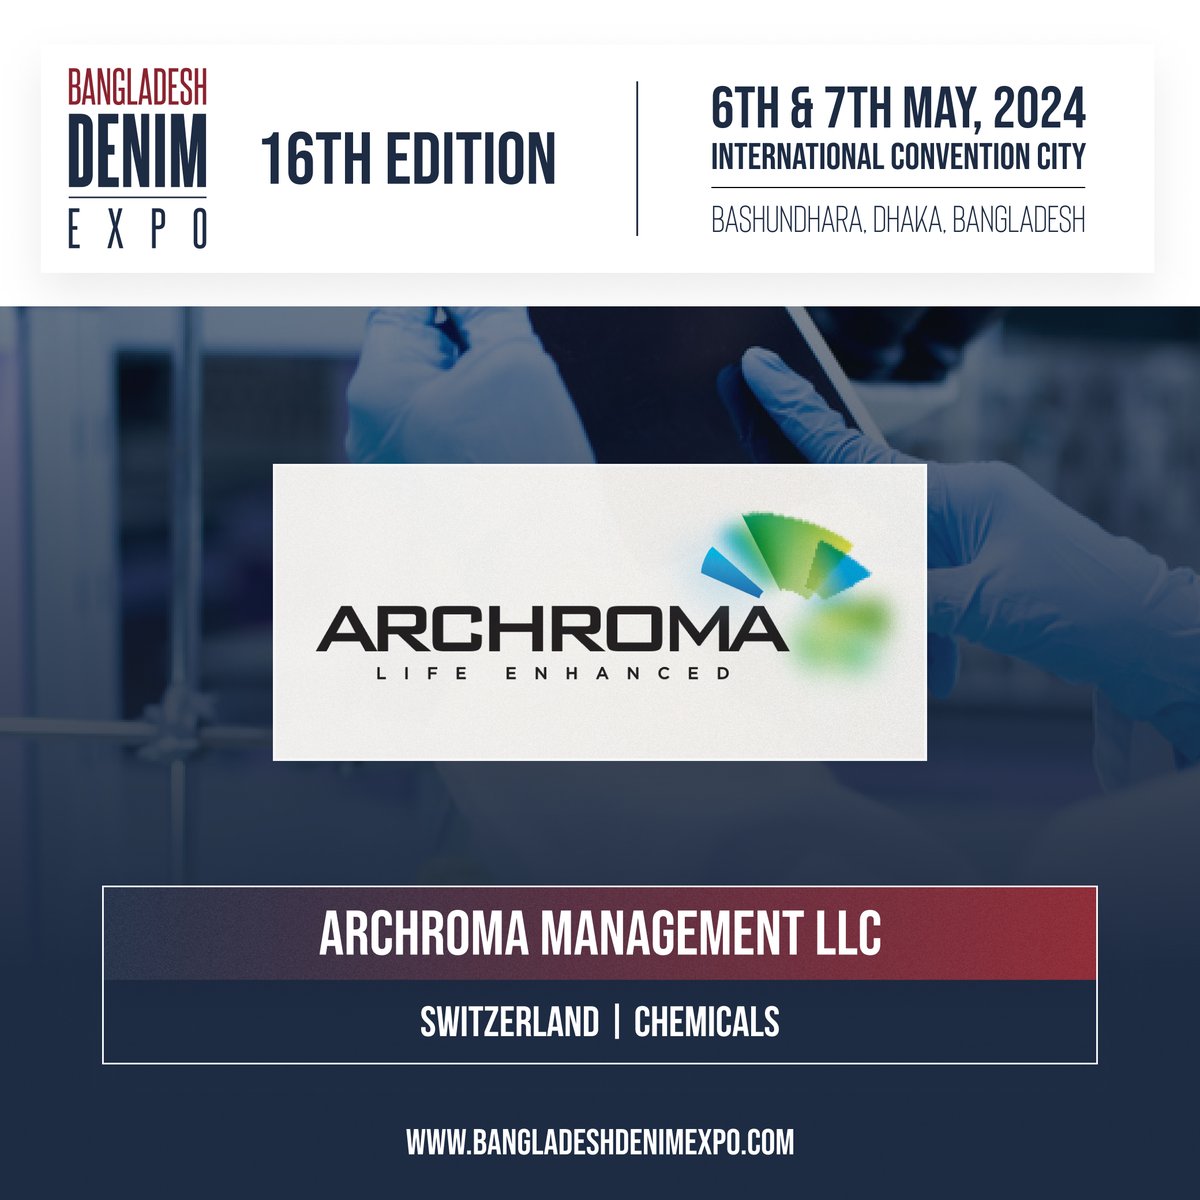 Join Archroma at the Bangladesh Denim Expo 2023 and explore cutting-edge sustainable #chemical solutions. Witness how we're leading sustainability from May 6-7 in Dhaka! 

#DenimExpo #SustainabilityInAction #BDE16 

Register now: visitor.bangladeshdenimexpo.com